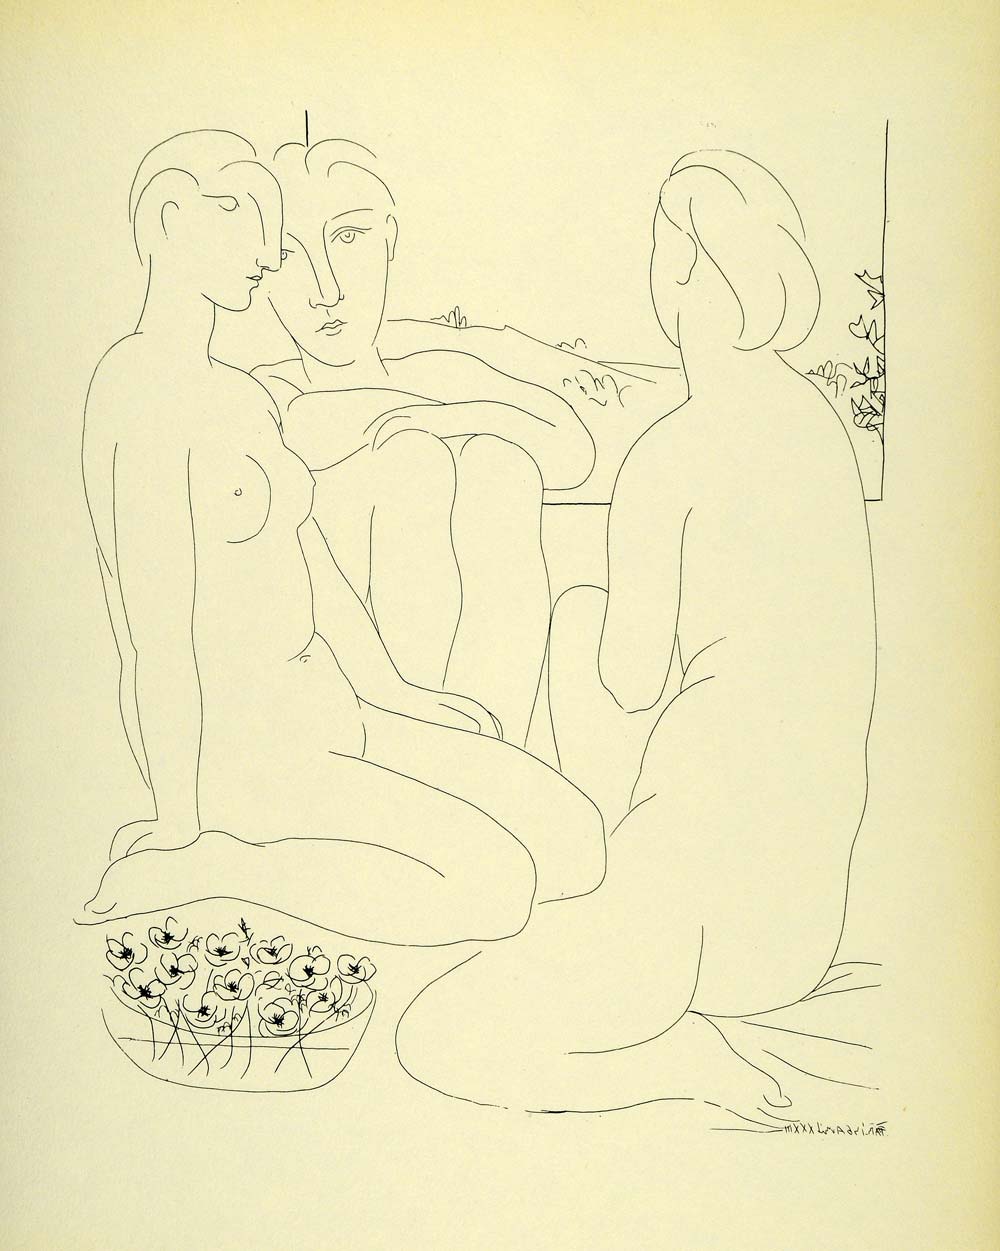 1956 Print Pablo Picasso Nude Female Figures Seated Basket Flowers Abstract Art